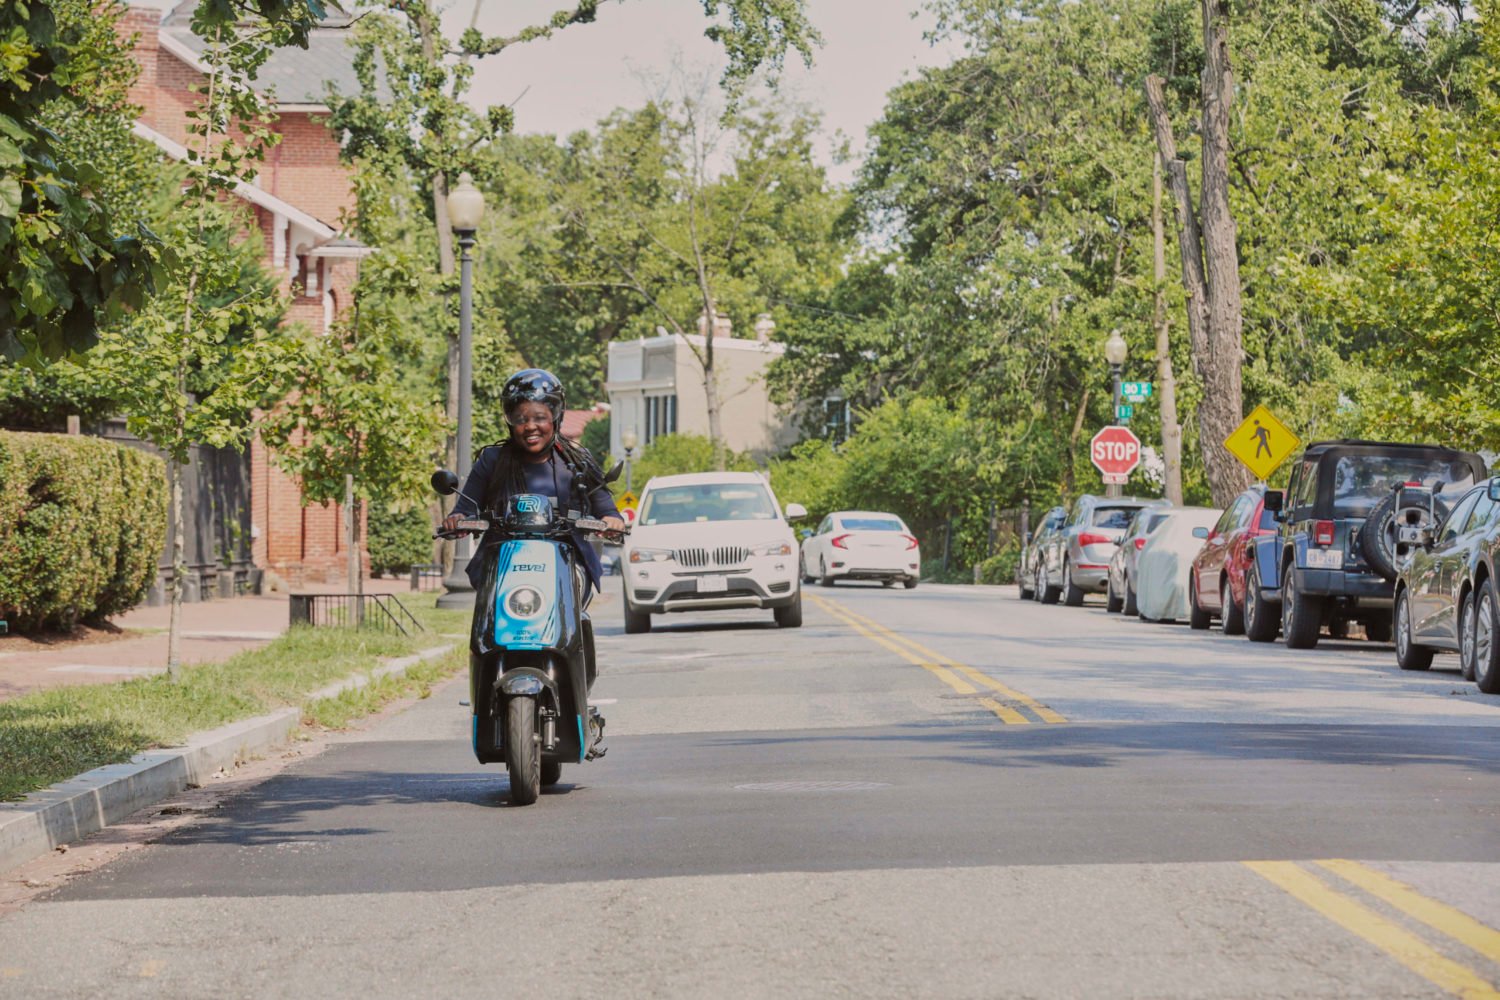 400 electric mopeds are coming to DC this weekend. Photo courtesy of Revel.